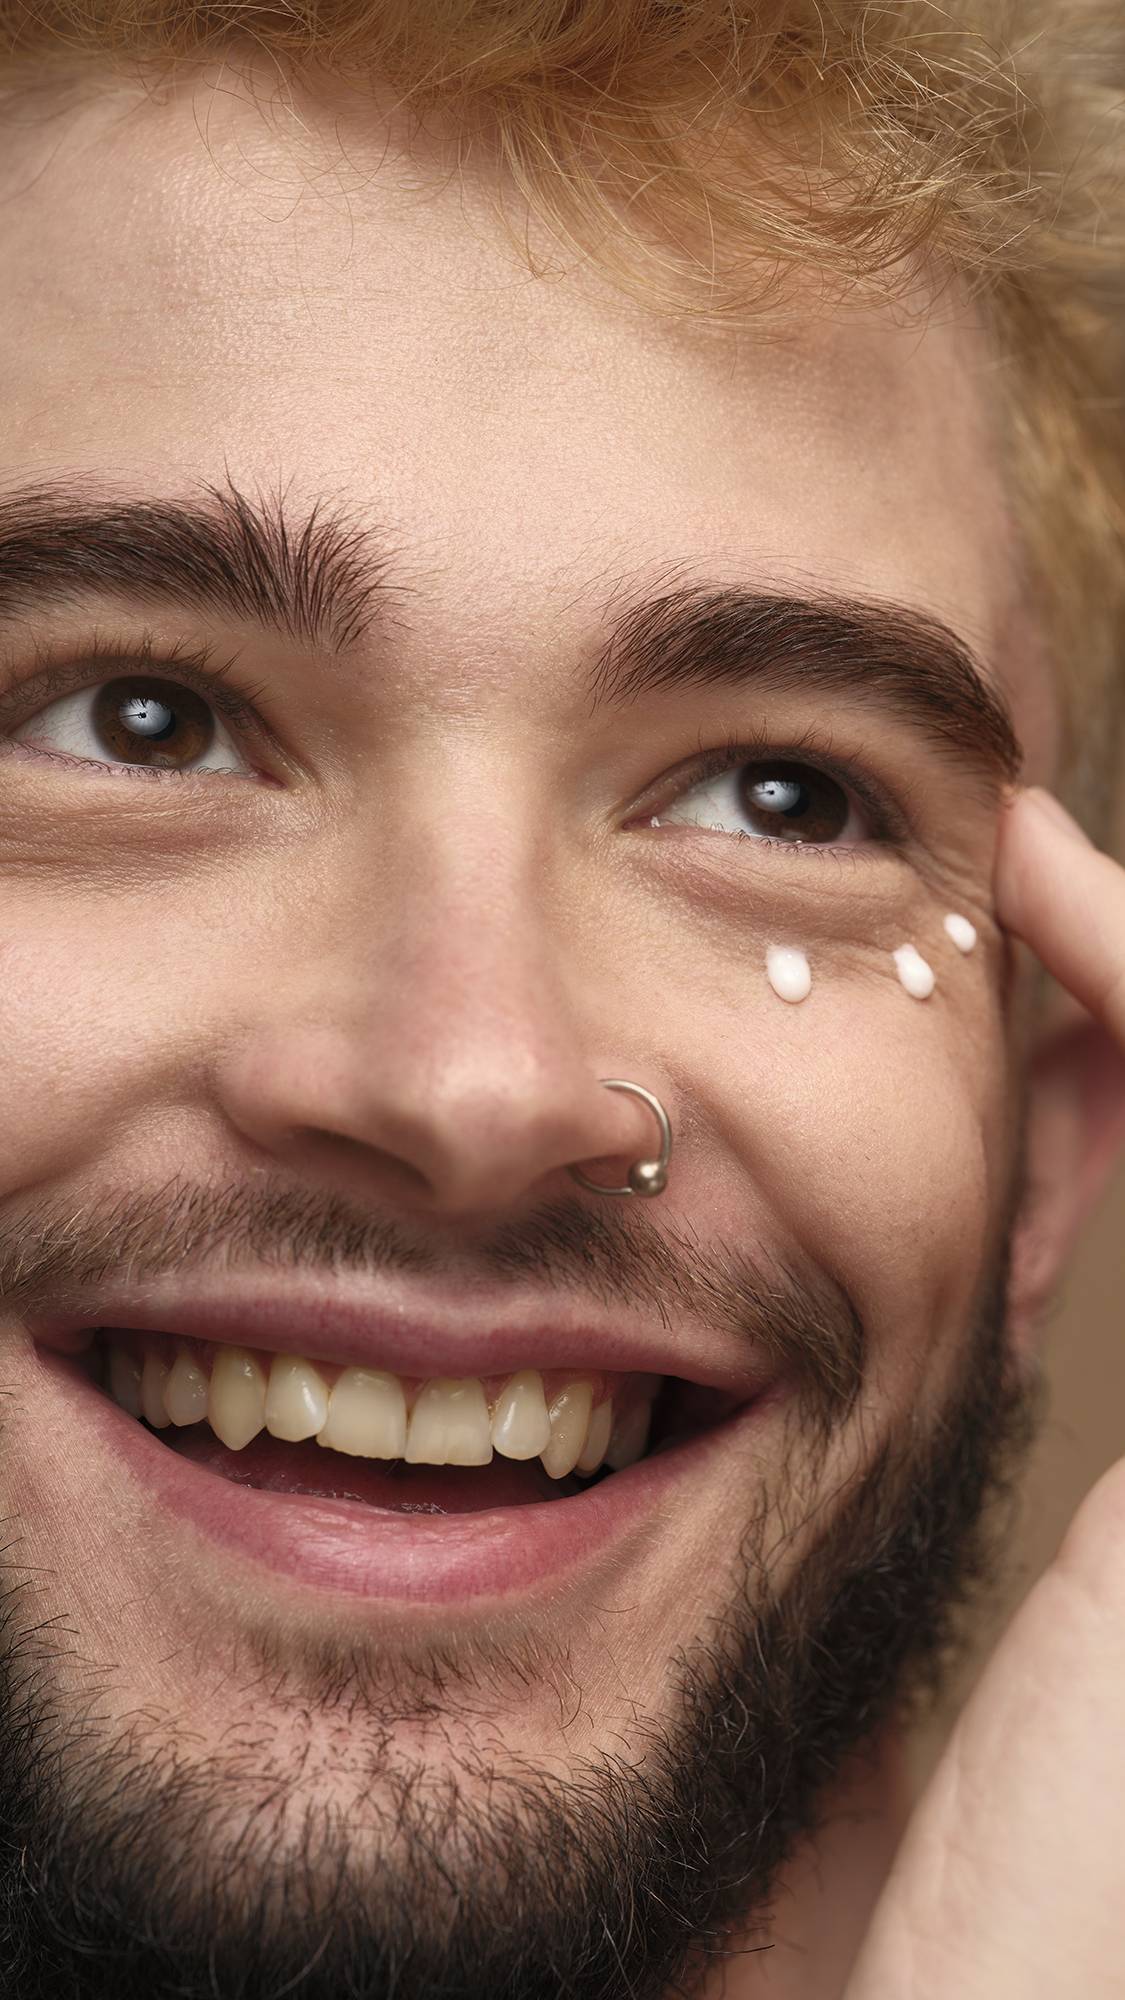 A close-up of the model's face. They are smiling with three drops of Enchanted eye cream neatly spotted under their eyes as they are about to smooth it into their skin.